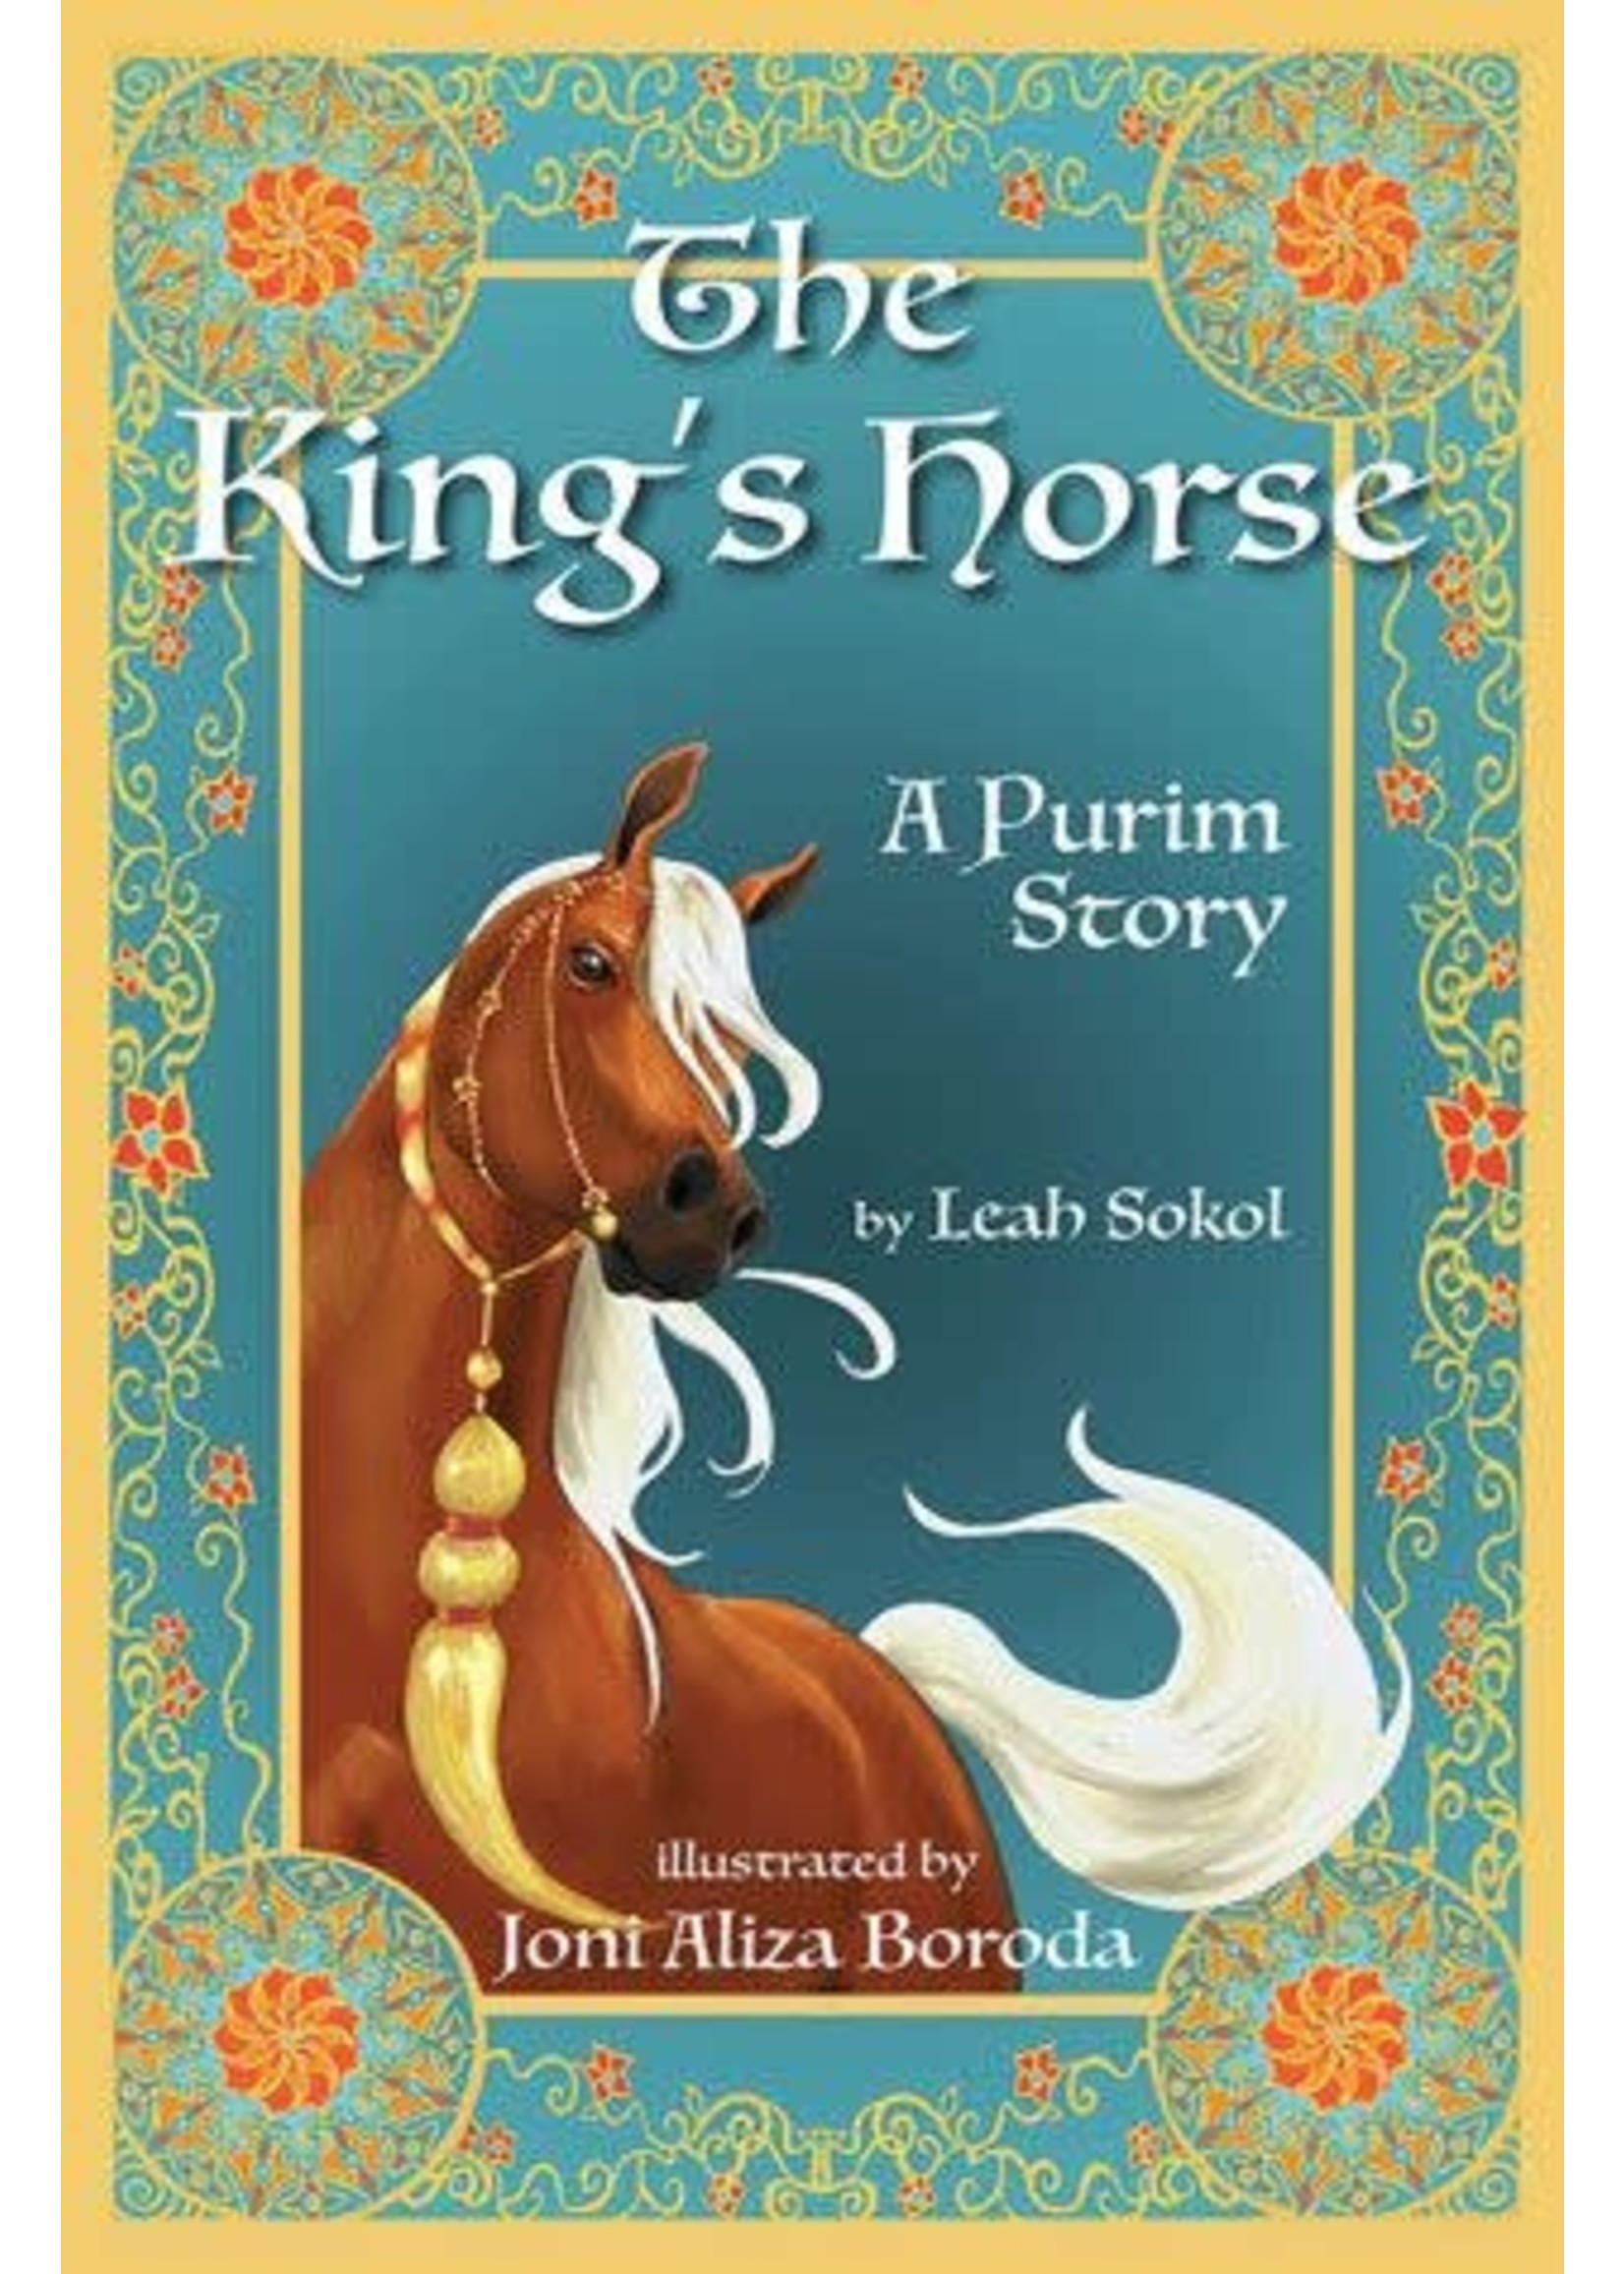 THE KING'S HORSE: A PURIM STORY